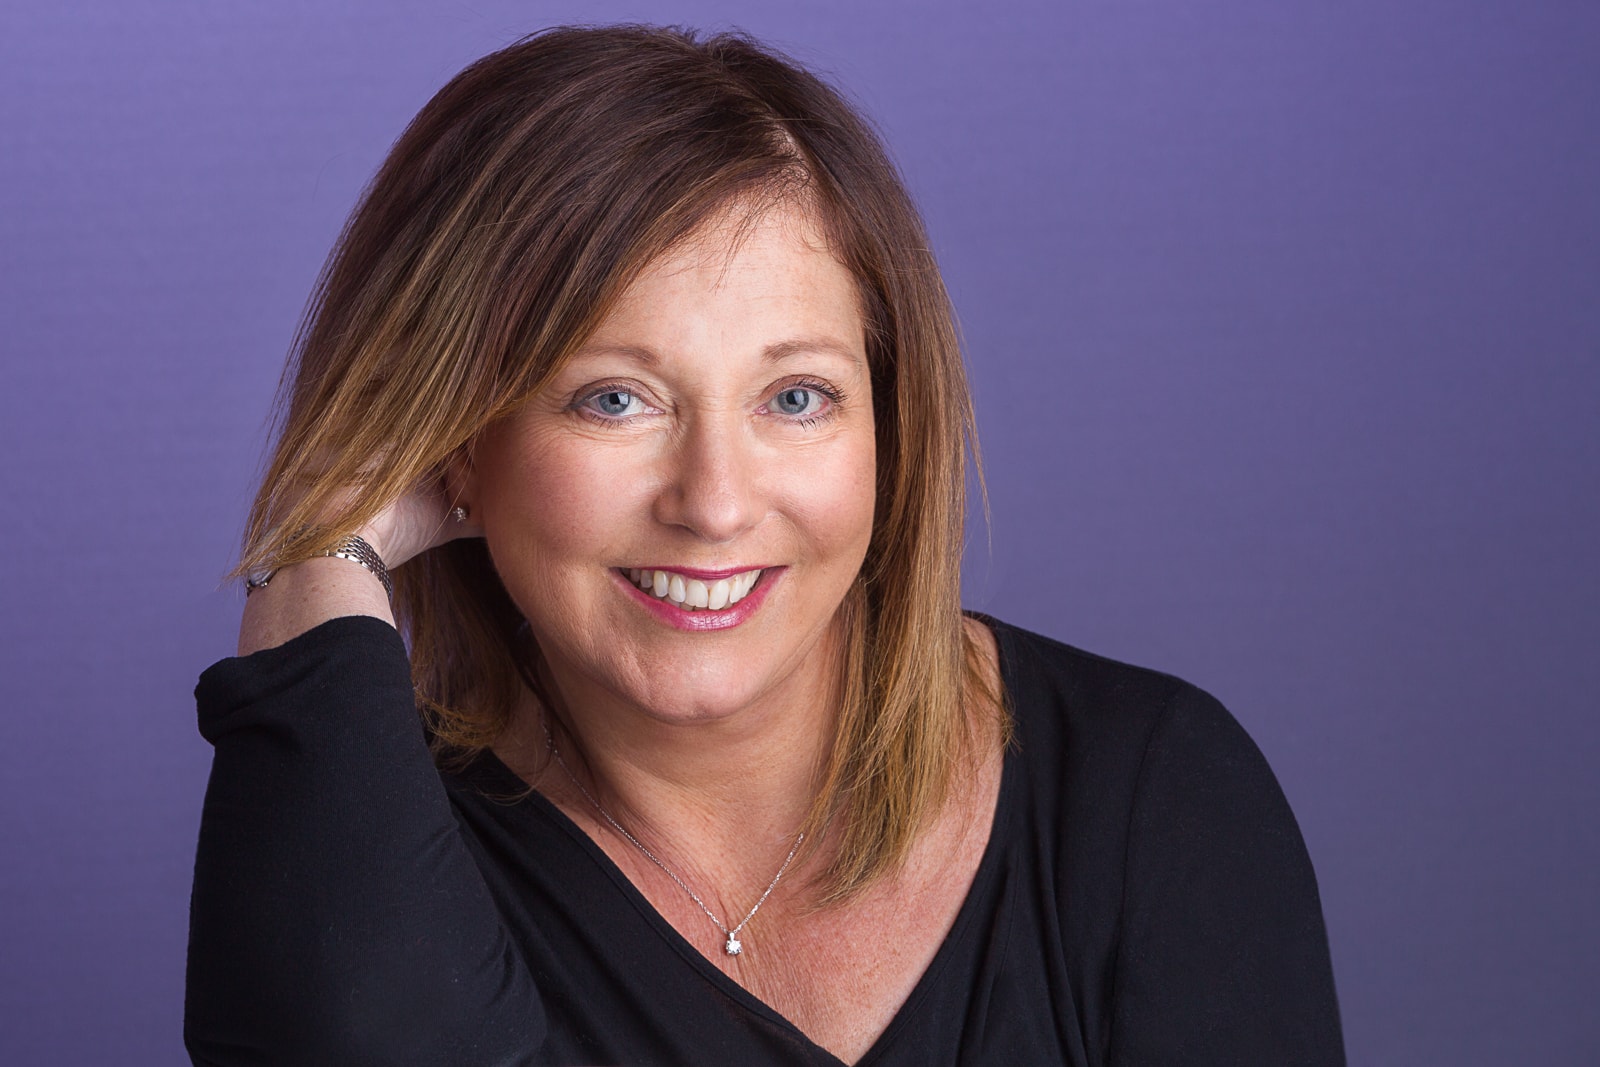 Marketing portrait of a middle aged woman with a dark top against a purple background